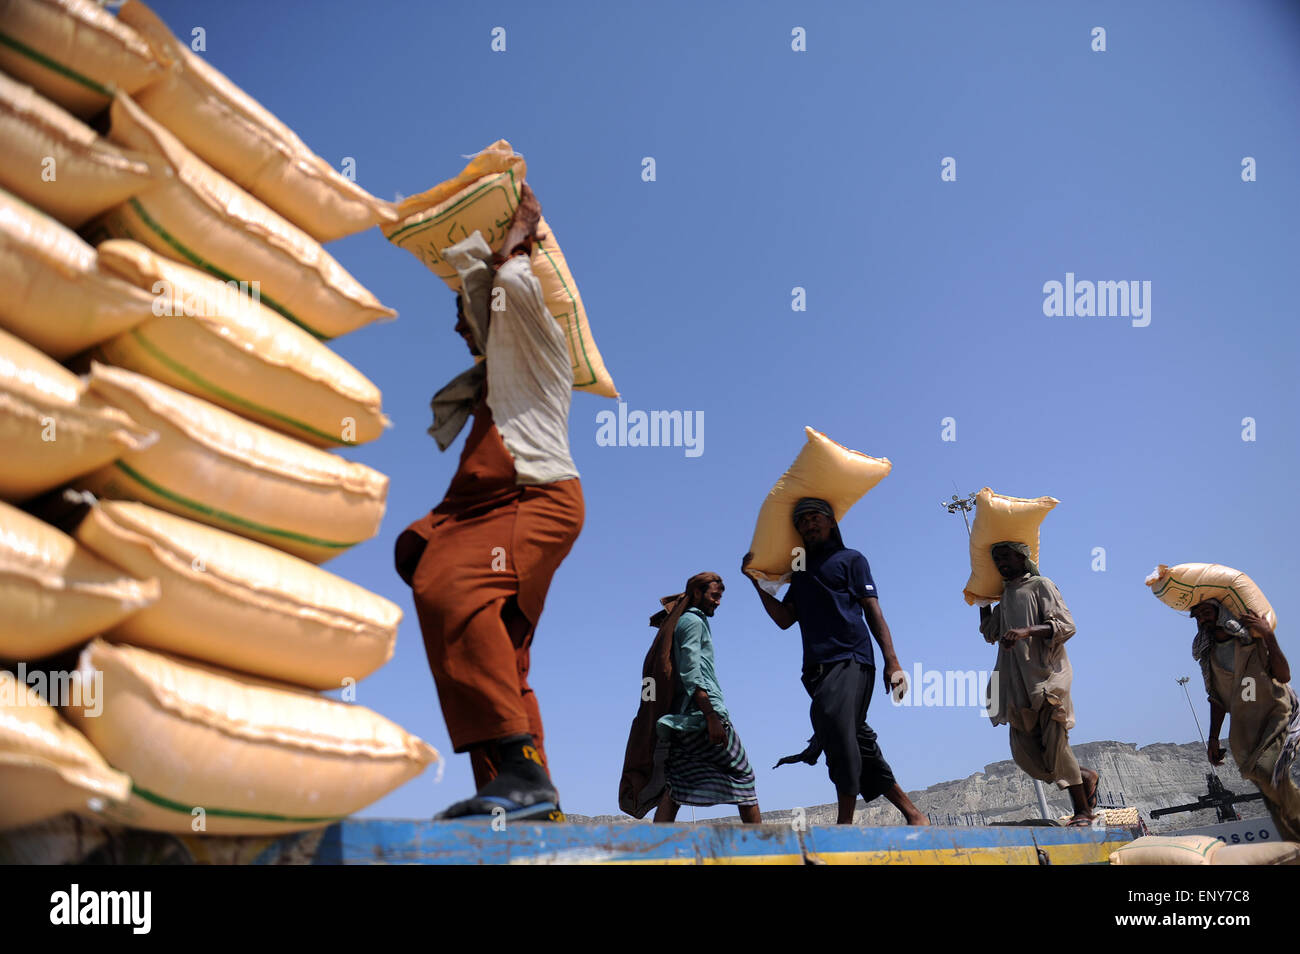 Karachi, Pakistan. 12th May, 2015. Dockers carry feed bags at the pier of Gwadar Port, southwestern Pakistan, on May 11, 2015. Gwadar Port, a warm-water, deep-sea port, is located at the mouth of the Persian Gulf in Gwadar of Pakistan's Baloschistan province. China and Pakistan agreed to build China-Pakistan Economic Corridor (CPEC) to connect the Pakistani port with Kashgar city in China's Xinjiang Uygur Autonomous Region. Stock Photo